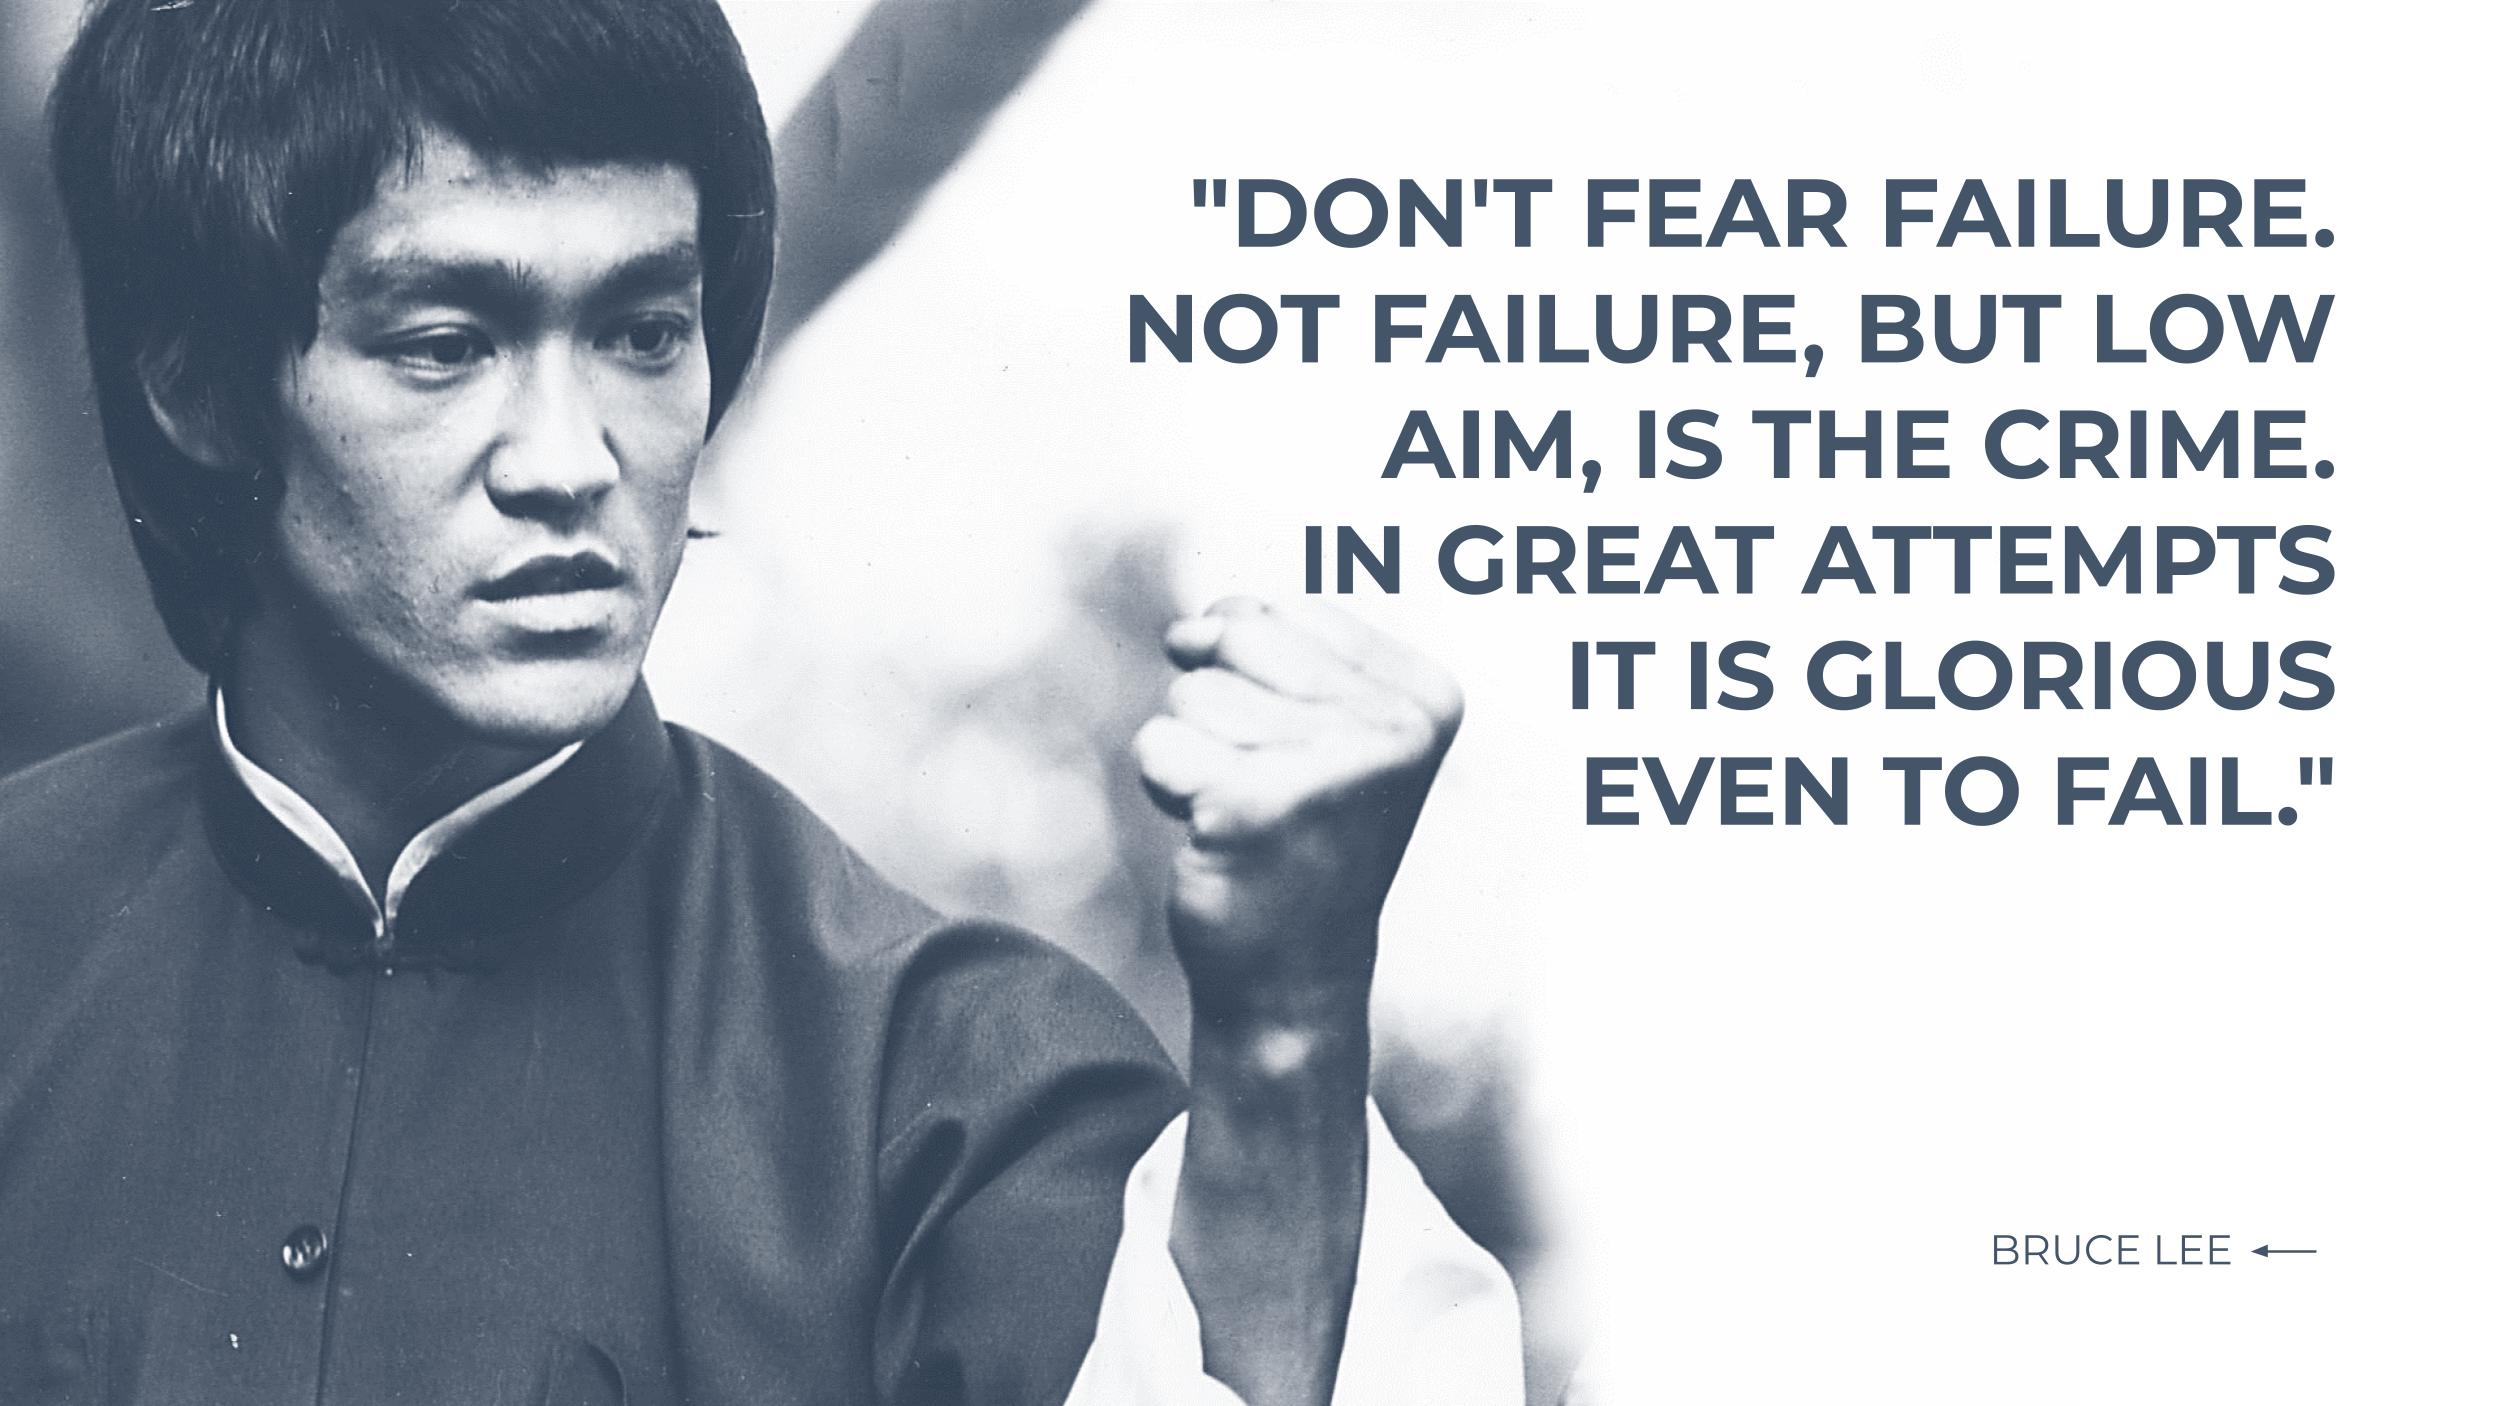 Bruce Lee: Not Failure, but low aim, is the crime.